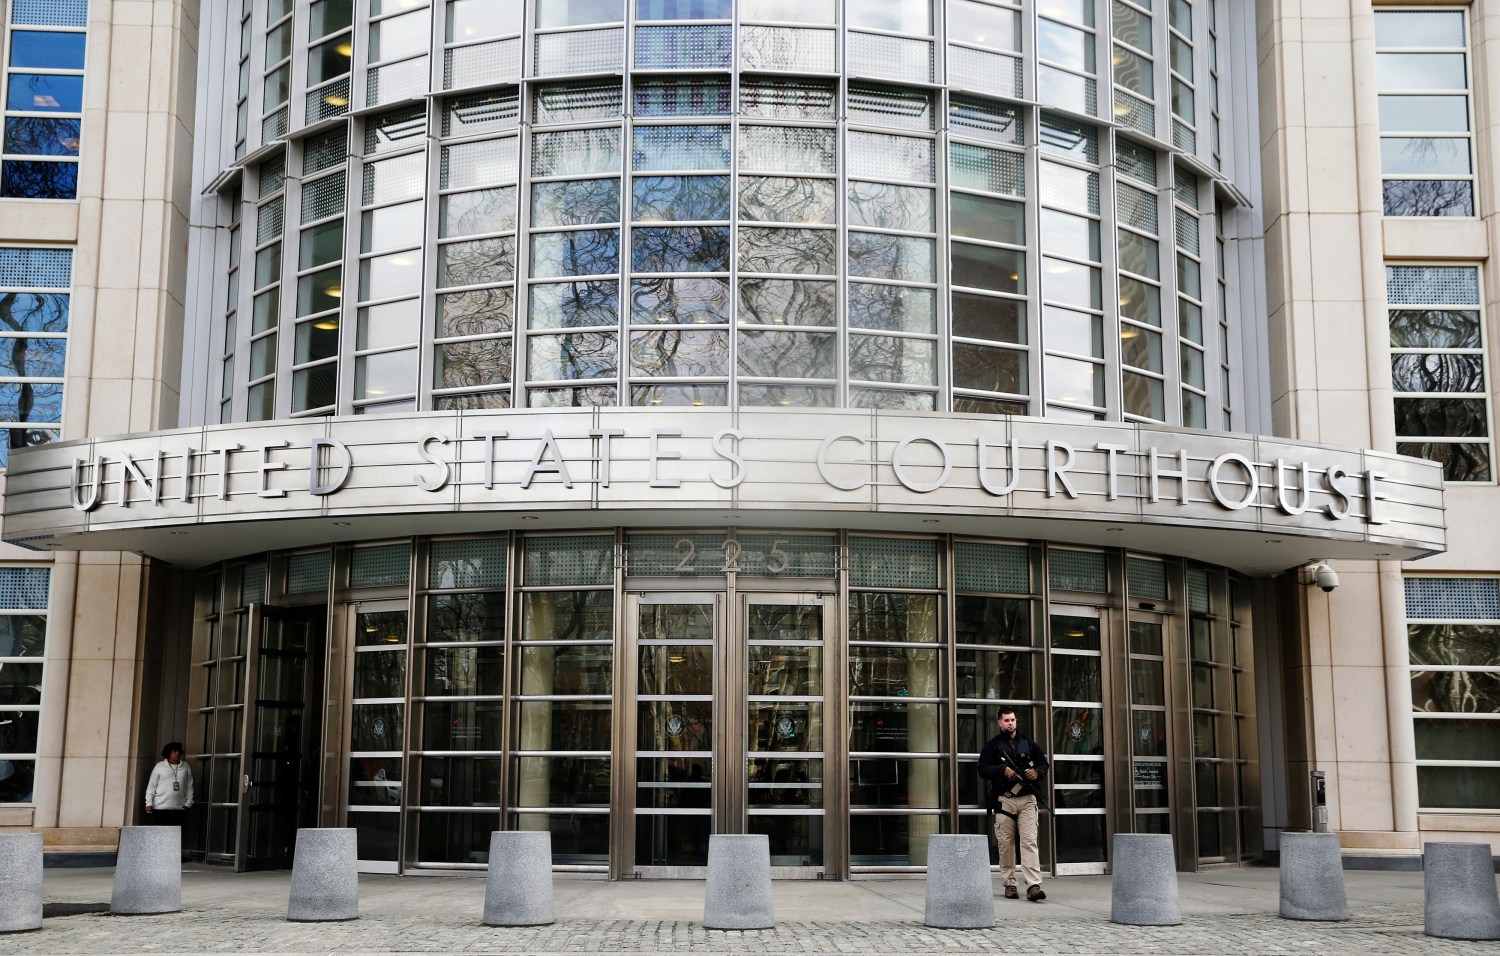 An armed U.S. Marshall stands outside federal court in Brooklyn before the court appearance of Tairod Nathan Webster Pugh, of Neptune, New Jersey, in the borough of Brooklyn in New York